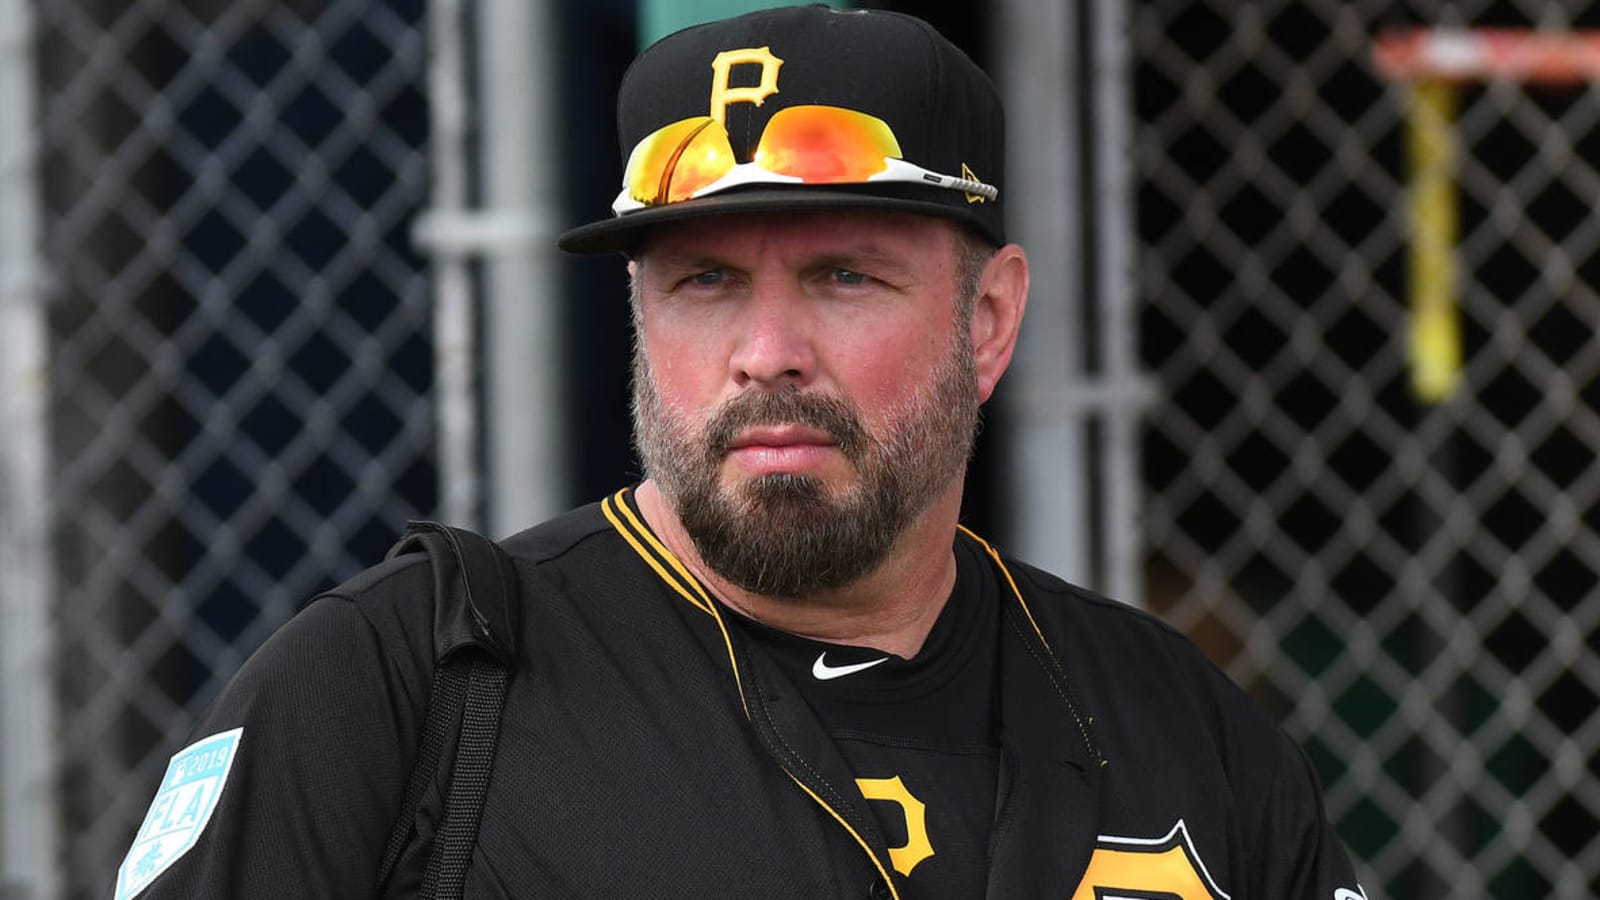 Garth Brooks: Taking part in spring training with Pirates 'heaven for me'